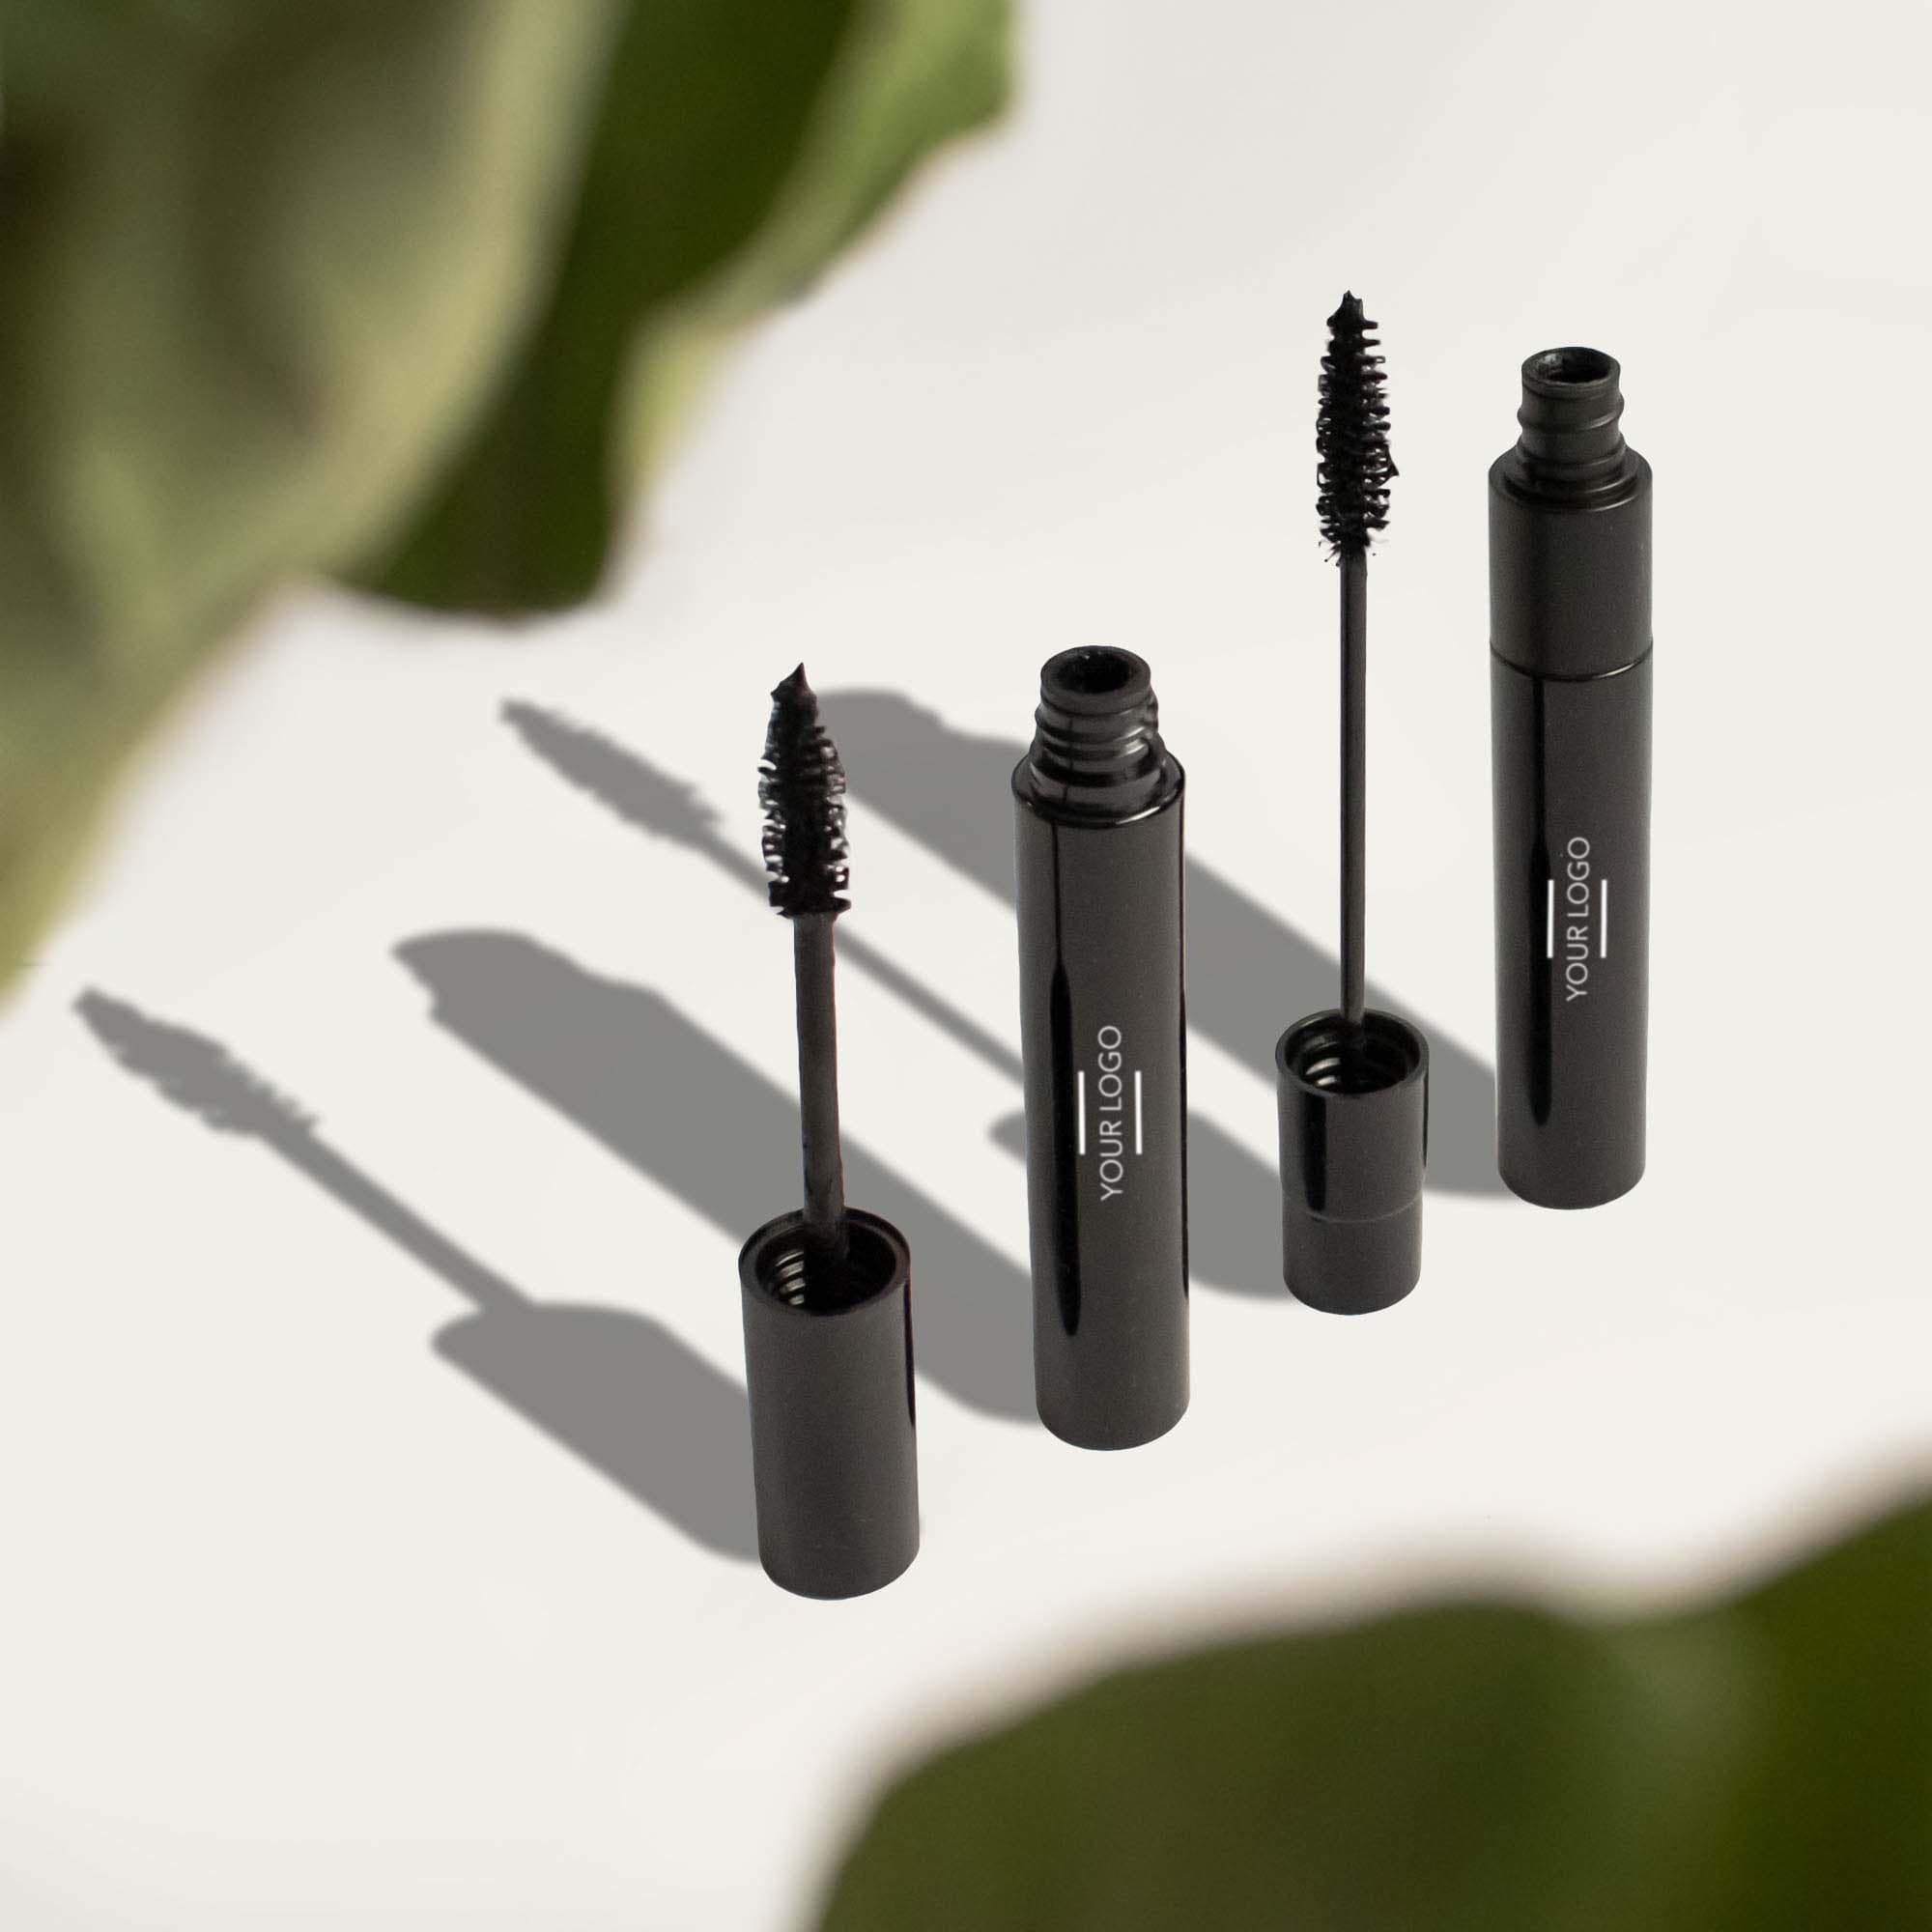 Cruelty-free Mascara with your logo printed on it. Blanka offers cruelty-free cosmetics with the option to also add branding on recyclable packaging materials!